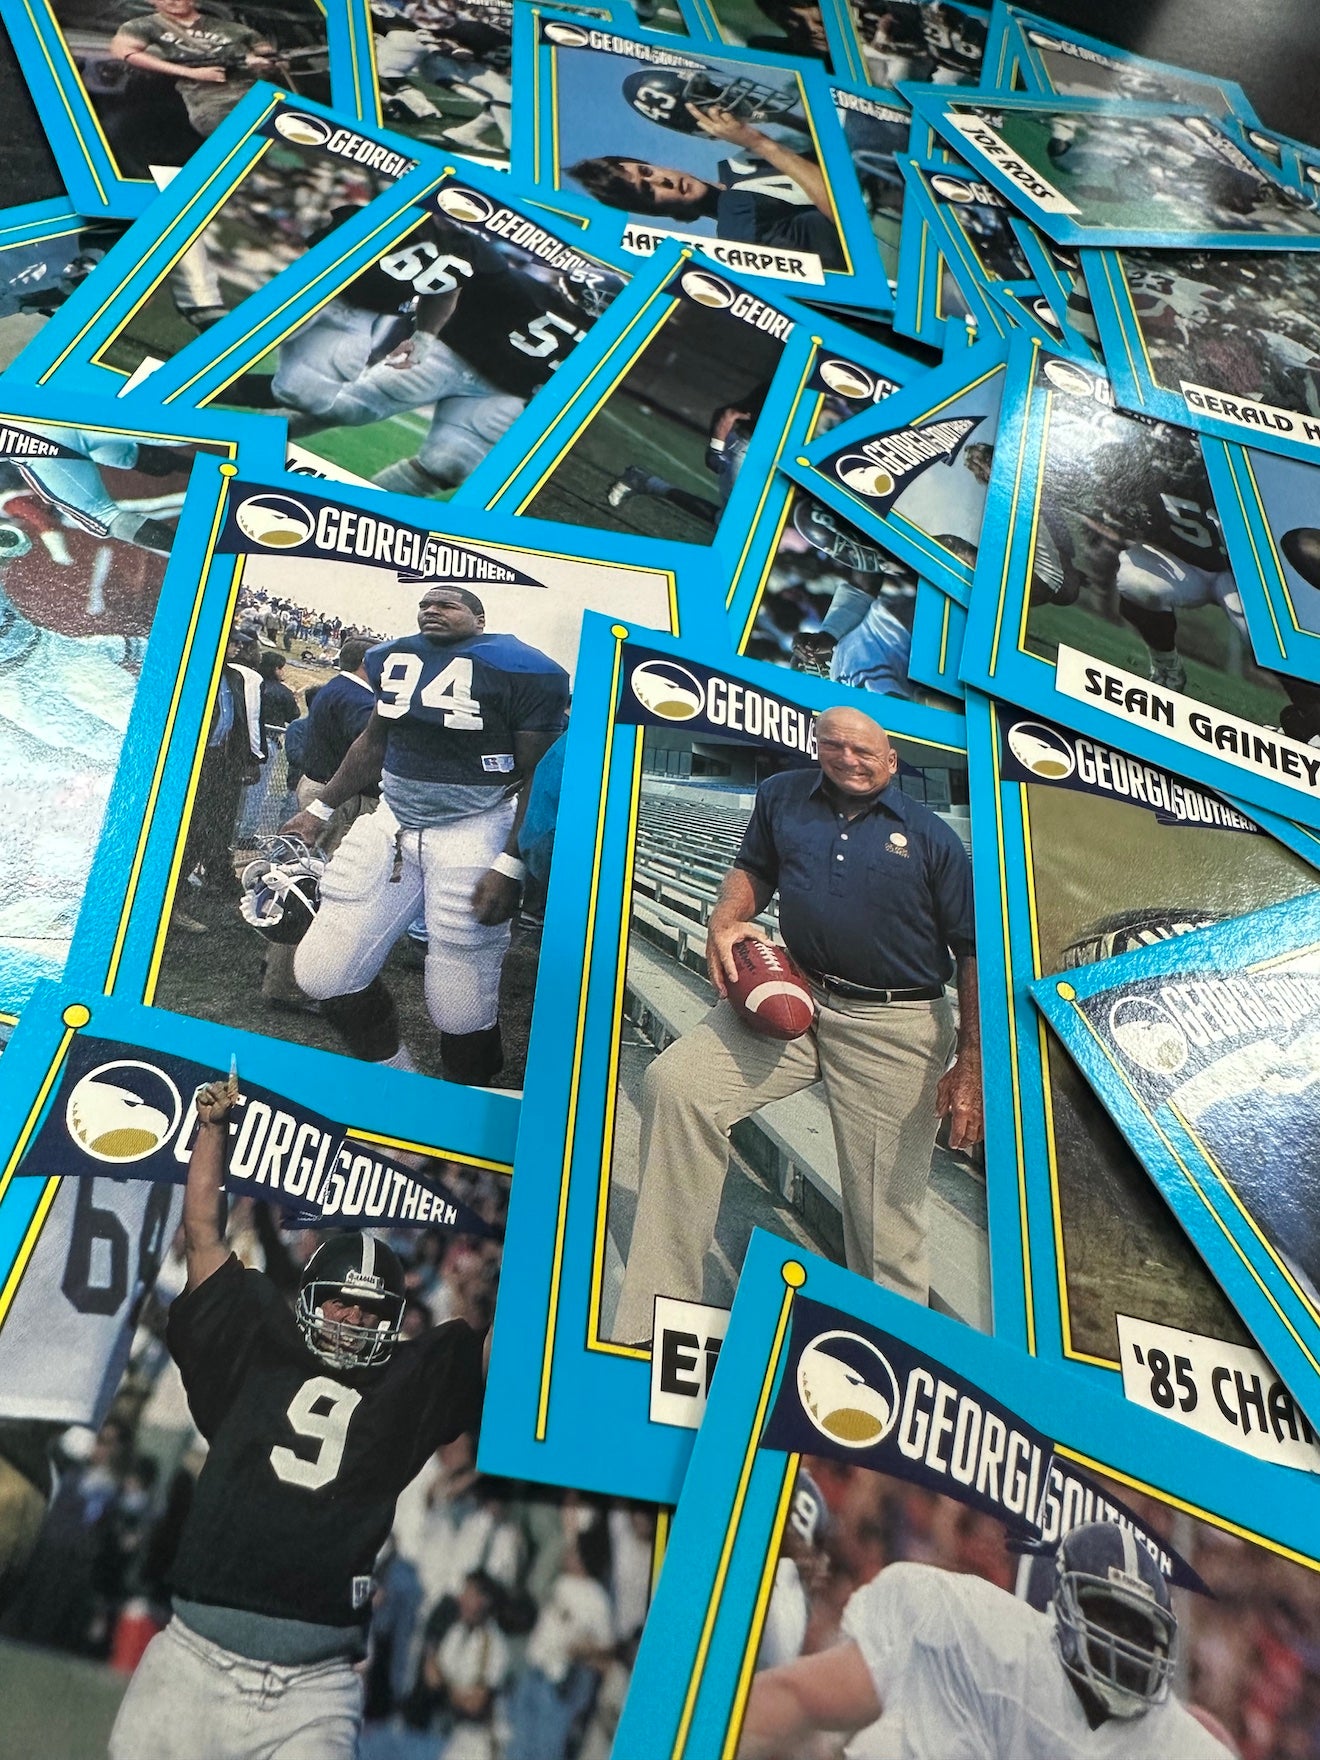 Georgia Southern Football - 1991 Sealed Limited Edition Collectors Cards